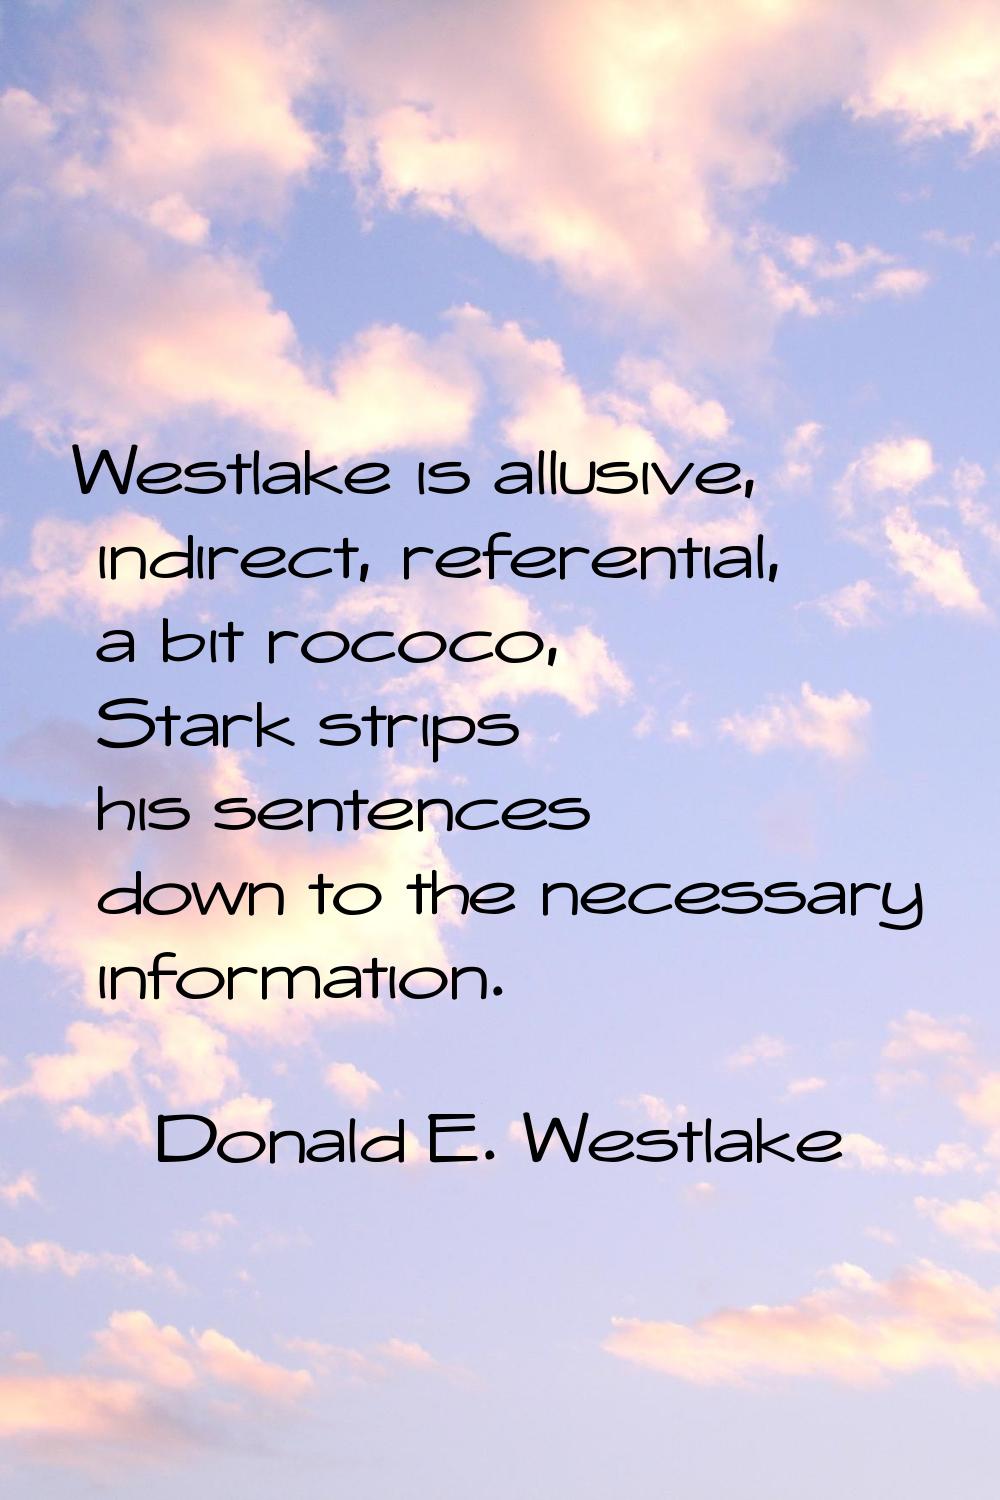 Westlake is allusive, indirect, referential, a bit rococo, Stark strips his sentences down to the n